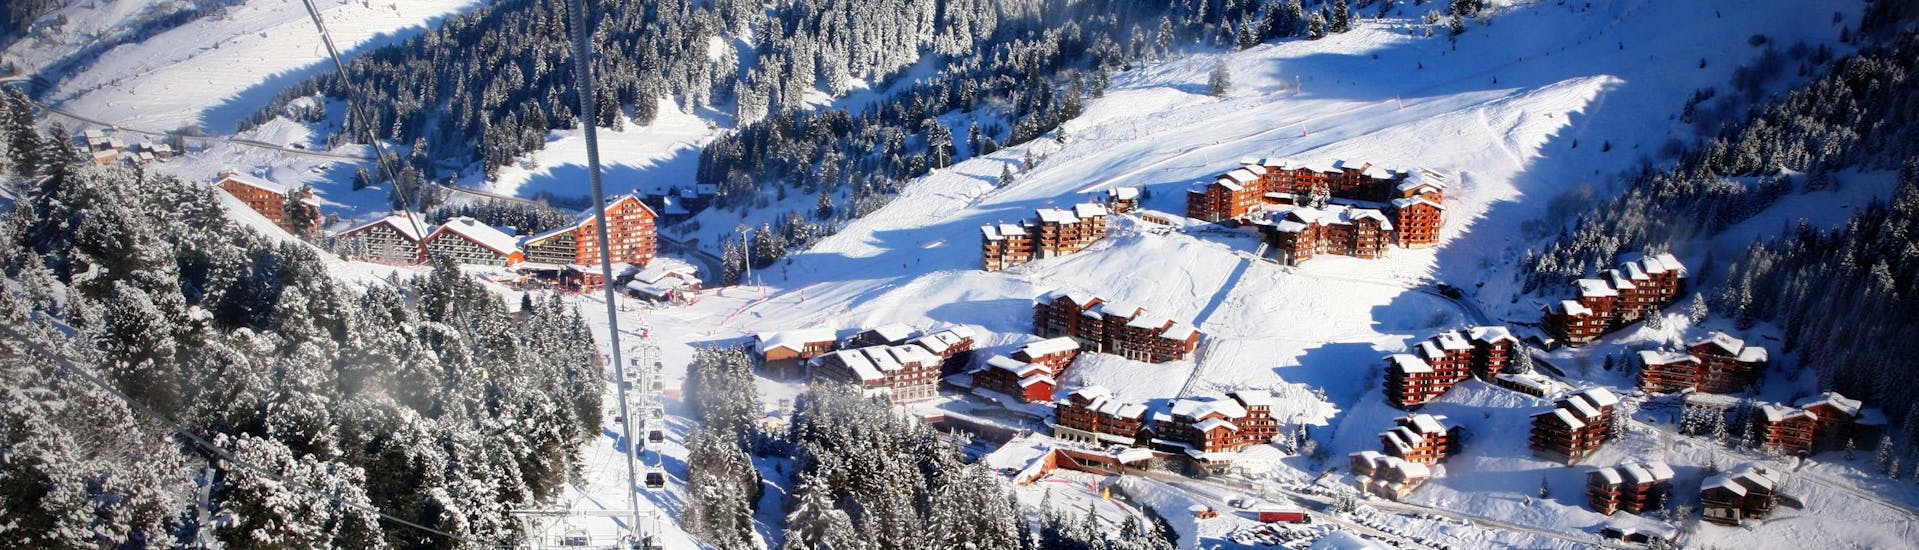 A view of the ski resort of Méribel with gondolas ascending one of the mountains where the local ski schools offer a variety of ski lessons. 